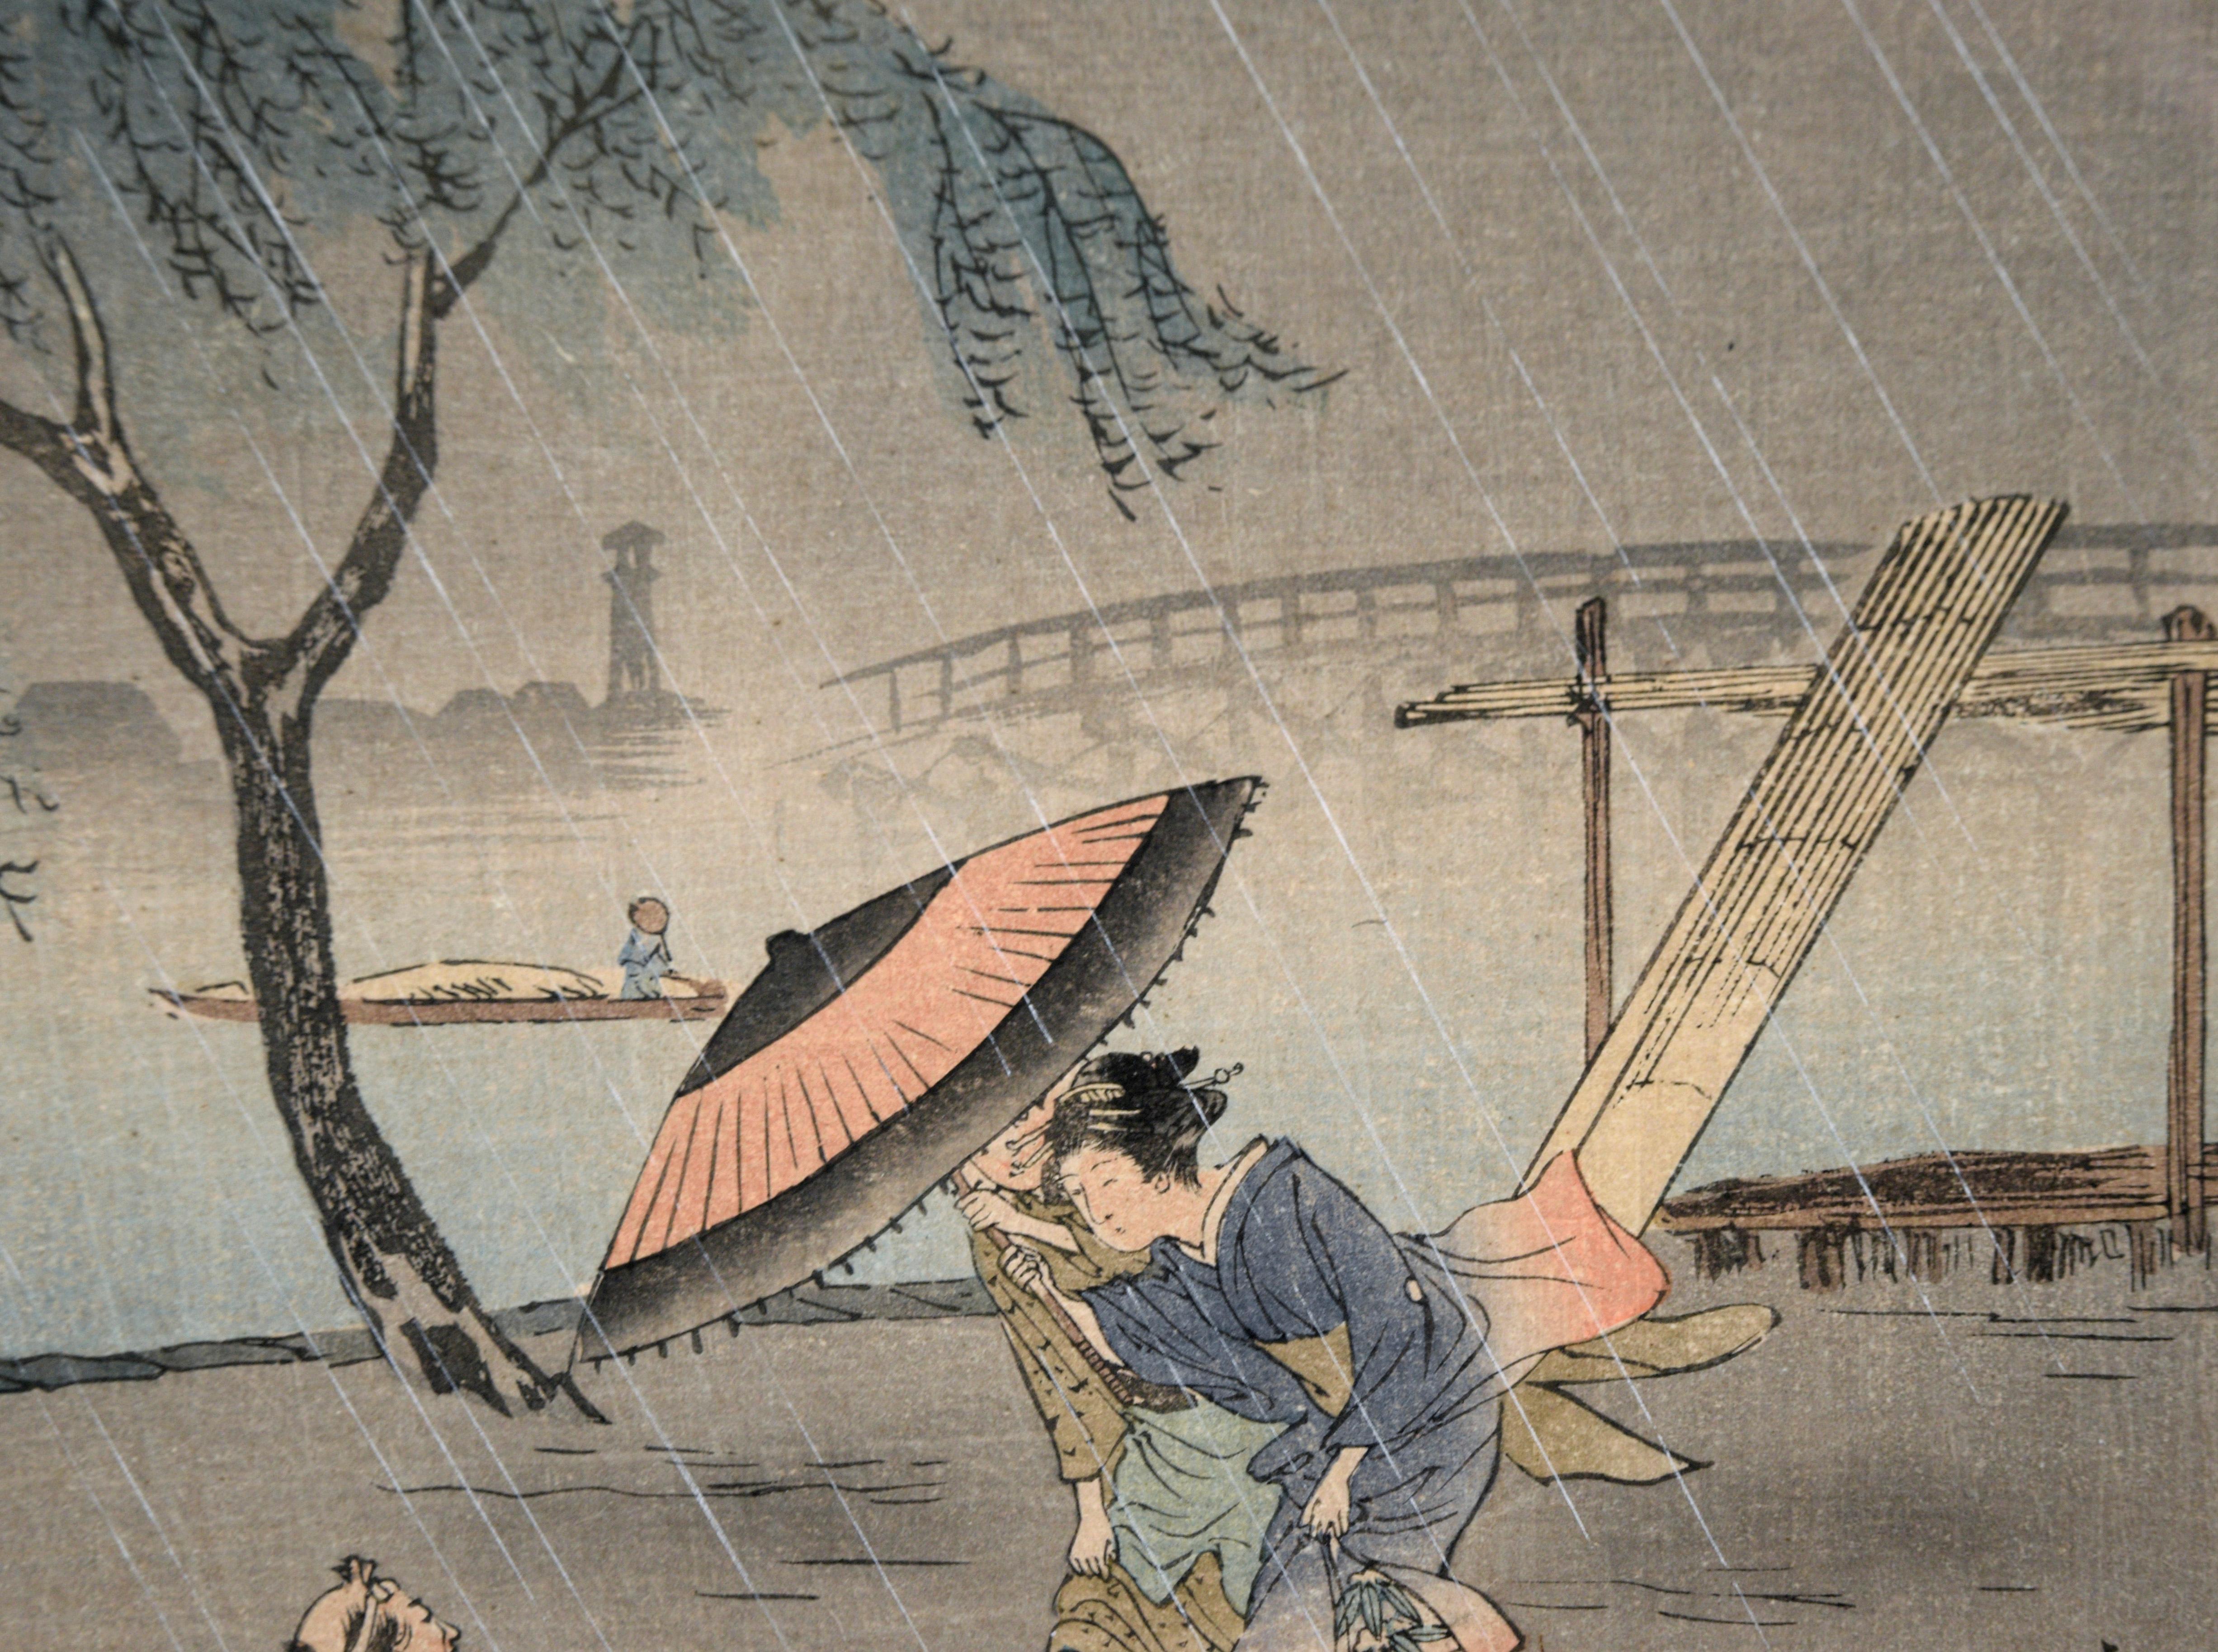 Caught in the Rain - Japanese Woodblock Etching in Ink on Paper

Gorgeous woodblock print of rainfall by Japanese artist SHOTEI (AKA HIROAKI) (Japanese, 1871 - 1945). Two people are walking in the rain along a riverbank, leaning forward into the